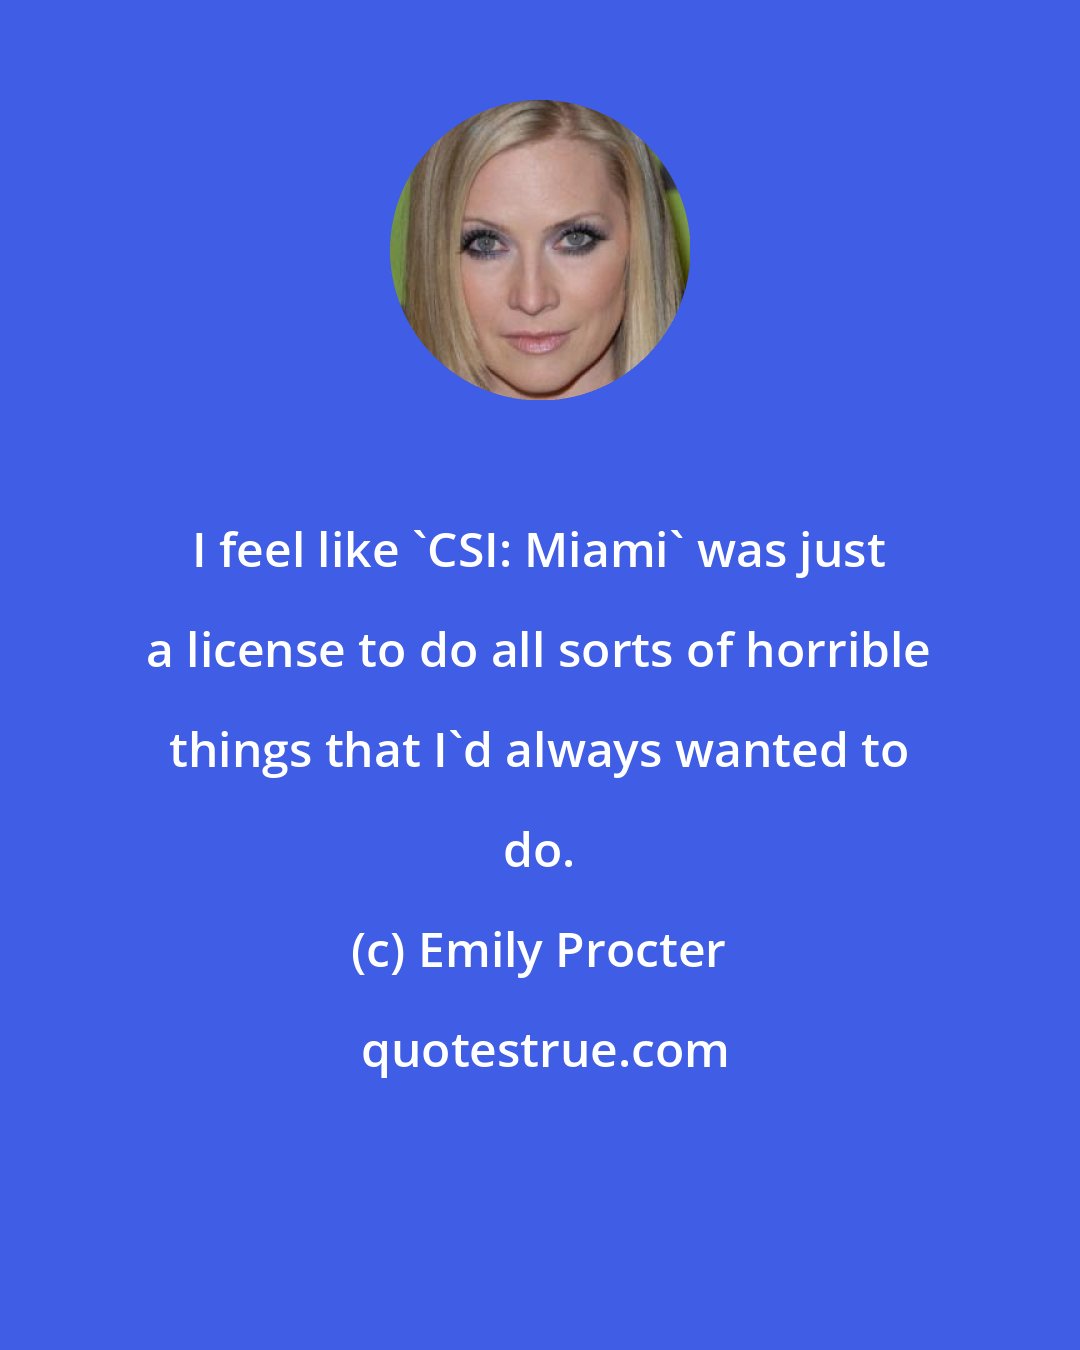 Emily Procter: I feel like 'CSI: Miami' was just a license to do all sorts of horrible things that I'd always wanted to do.